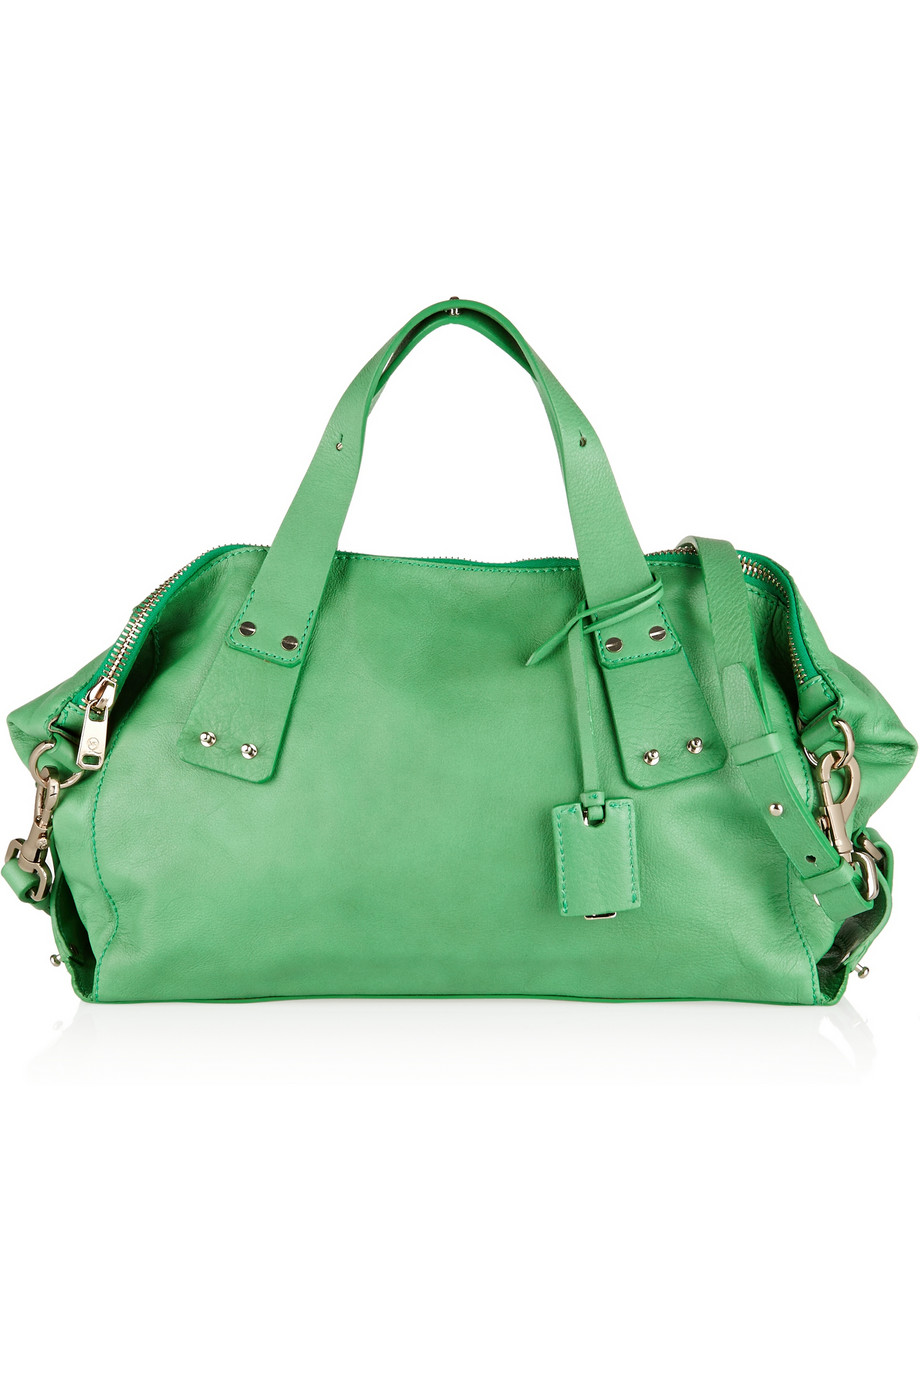 Lyst - Mcq Stratford Leather Tote in Green